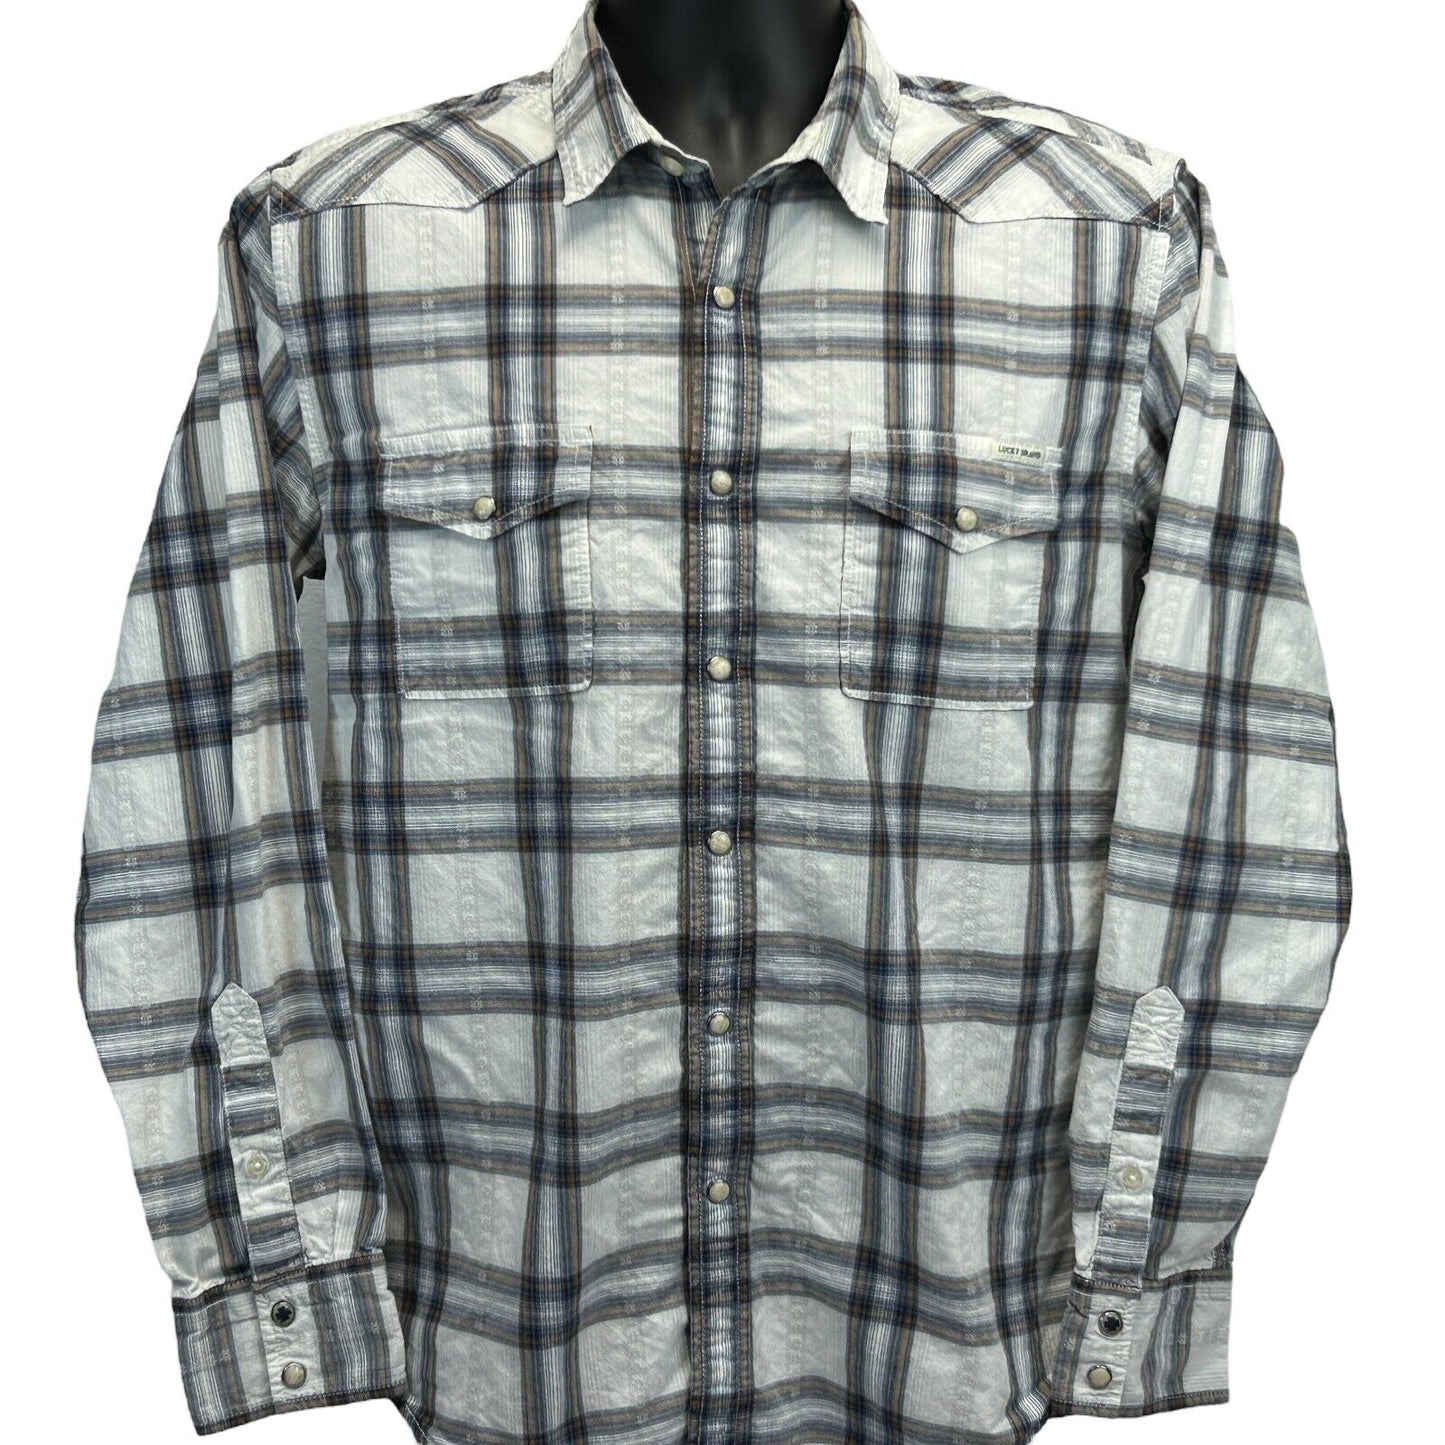 Lucky Brand Jeans Western Pearl Snap Button Front Shirt Medium Plaid Mens White